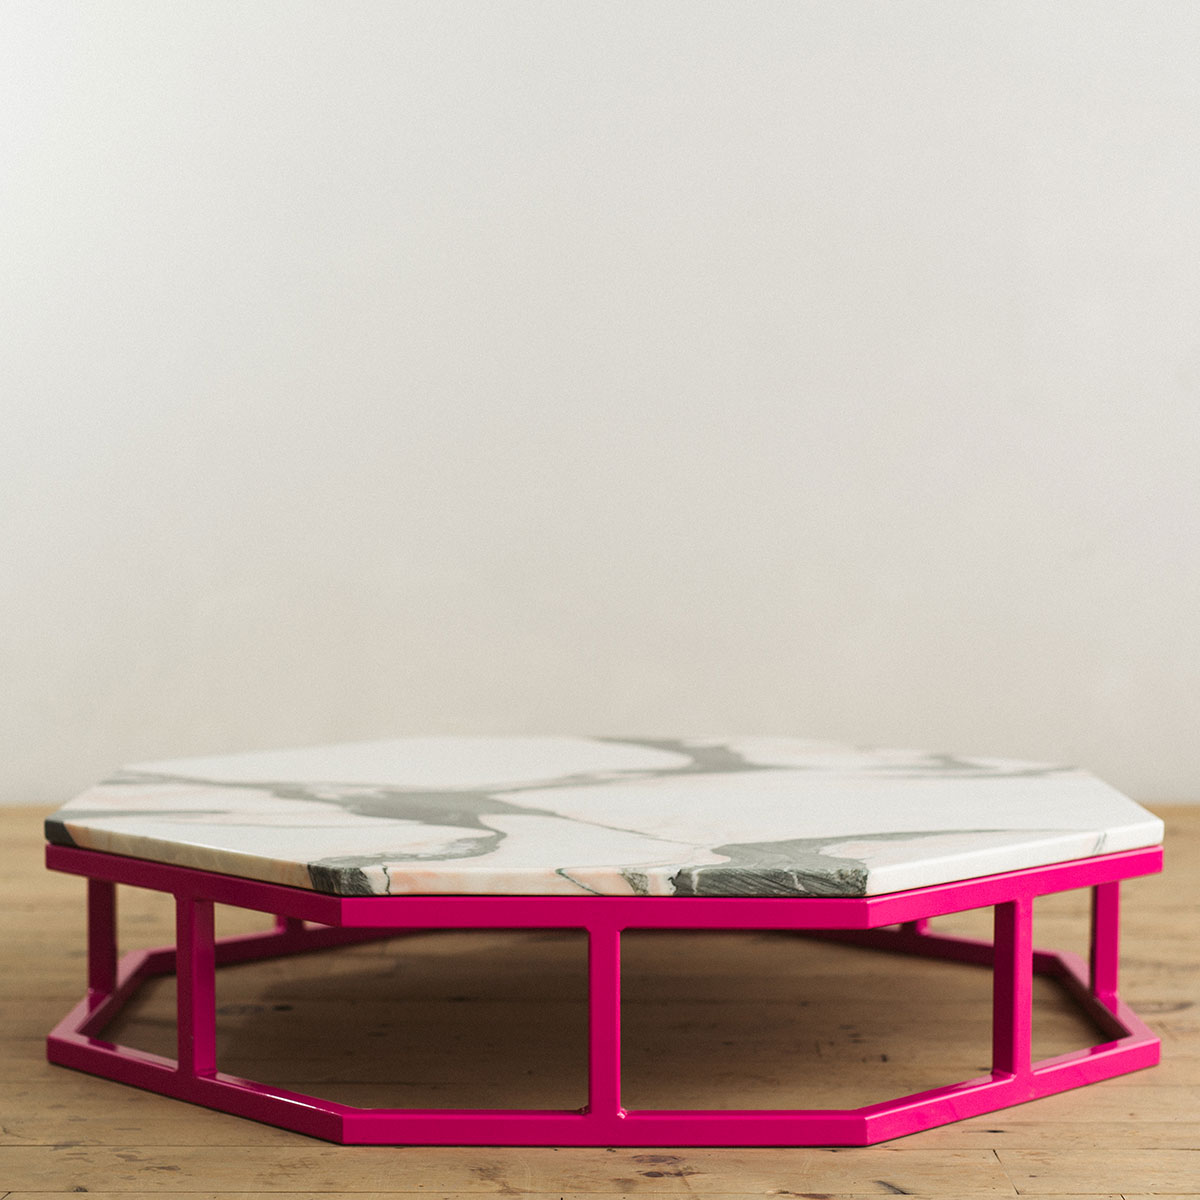 octagon-steel-marble-coffee-table-pink-2